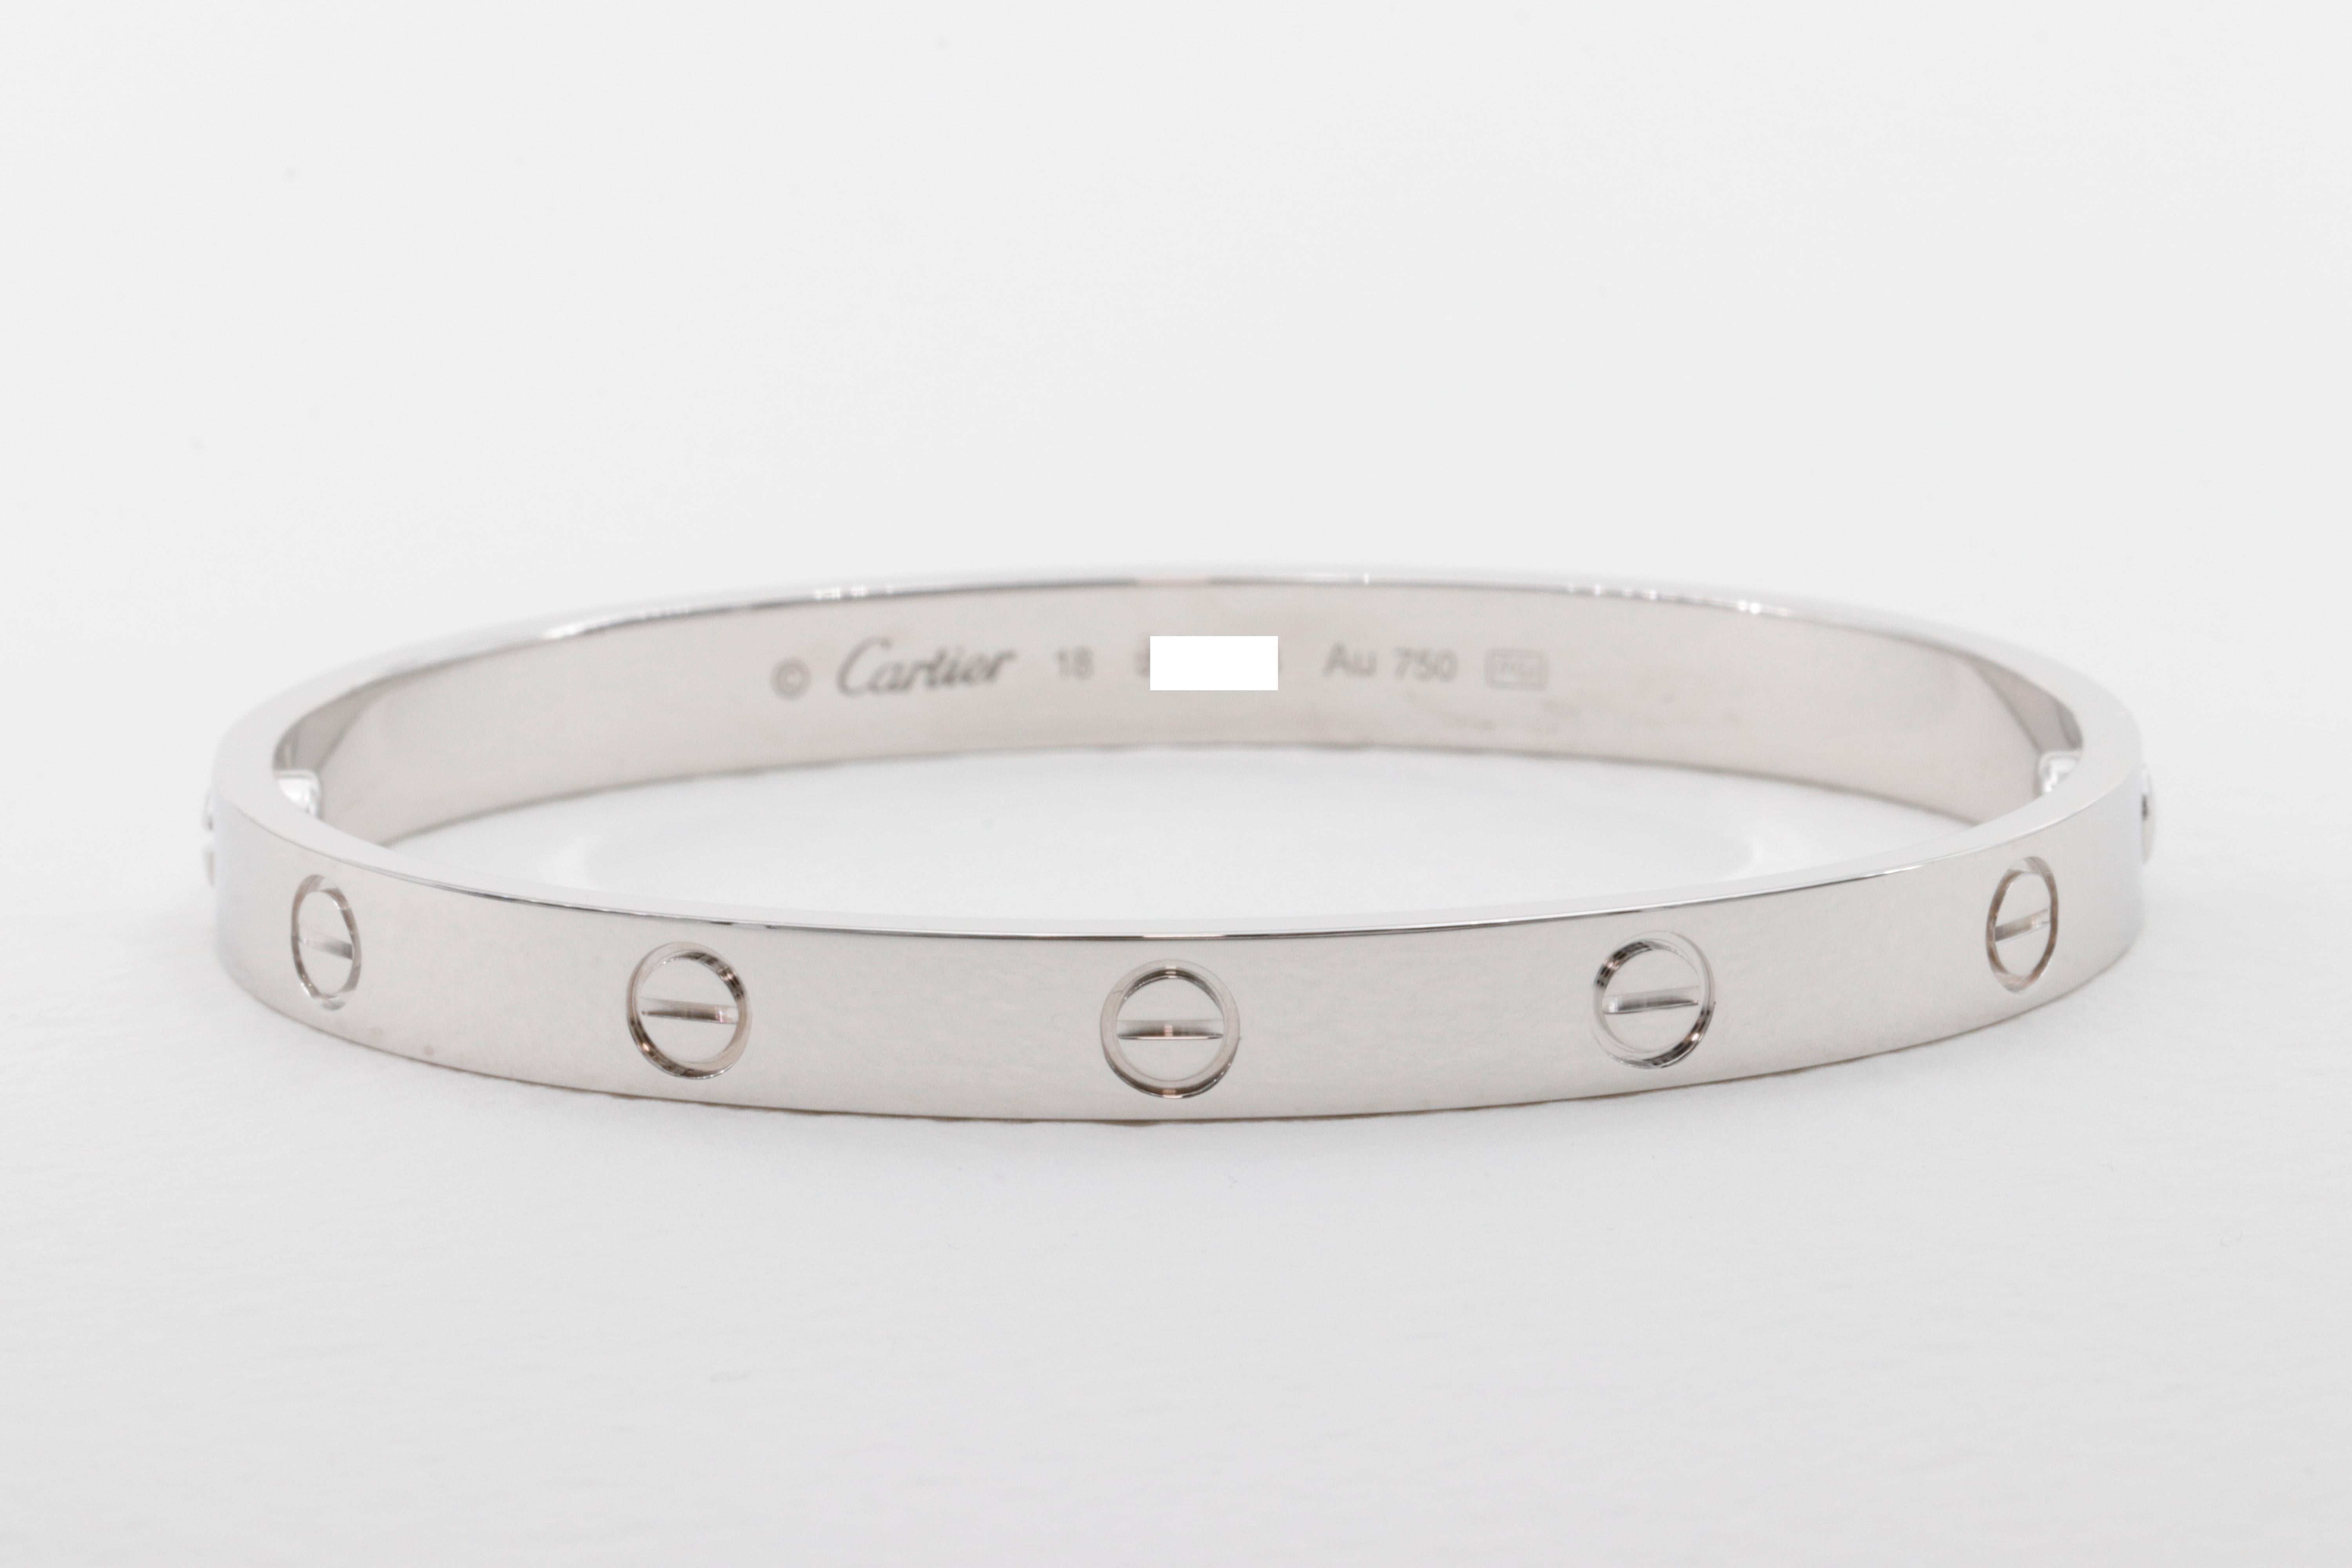 Cartier Love Bracelet 18k White Gold Box, Papers and Screwdriver Size 18

Professionally cleaned, detailed, polished and rhodiumed. 

Includes original Cartier box, paper work in folder, and screwdriver.